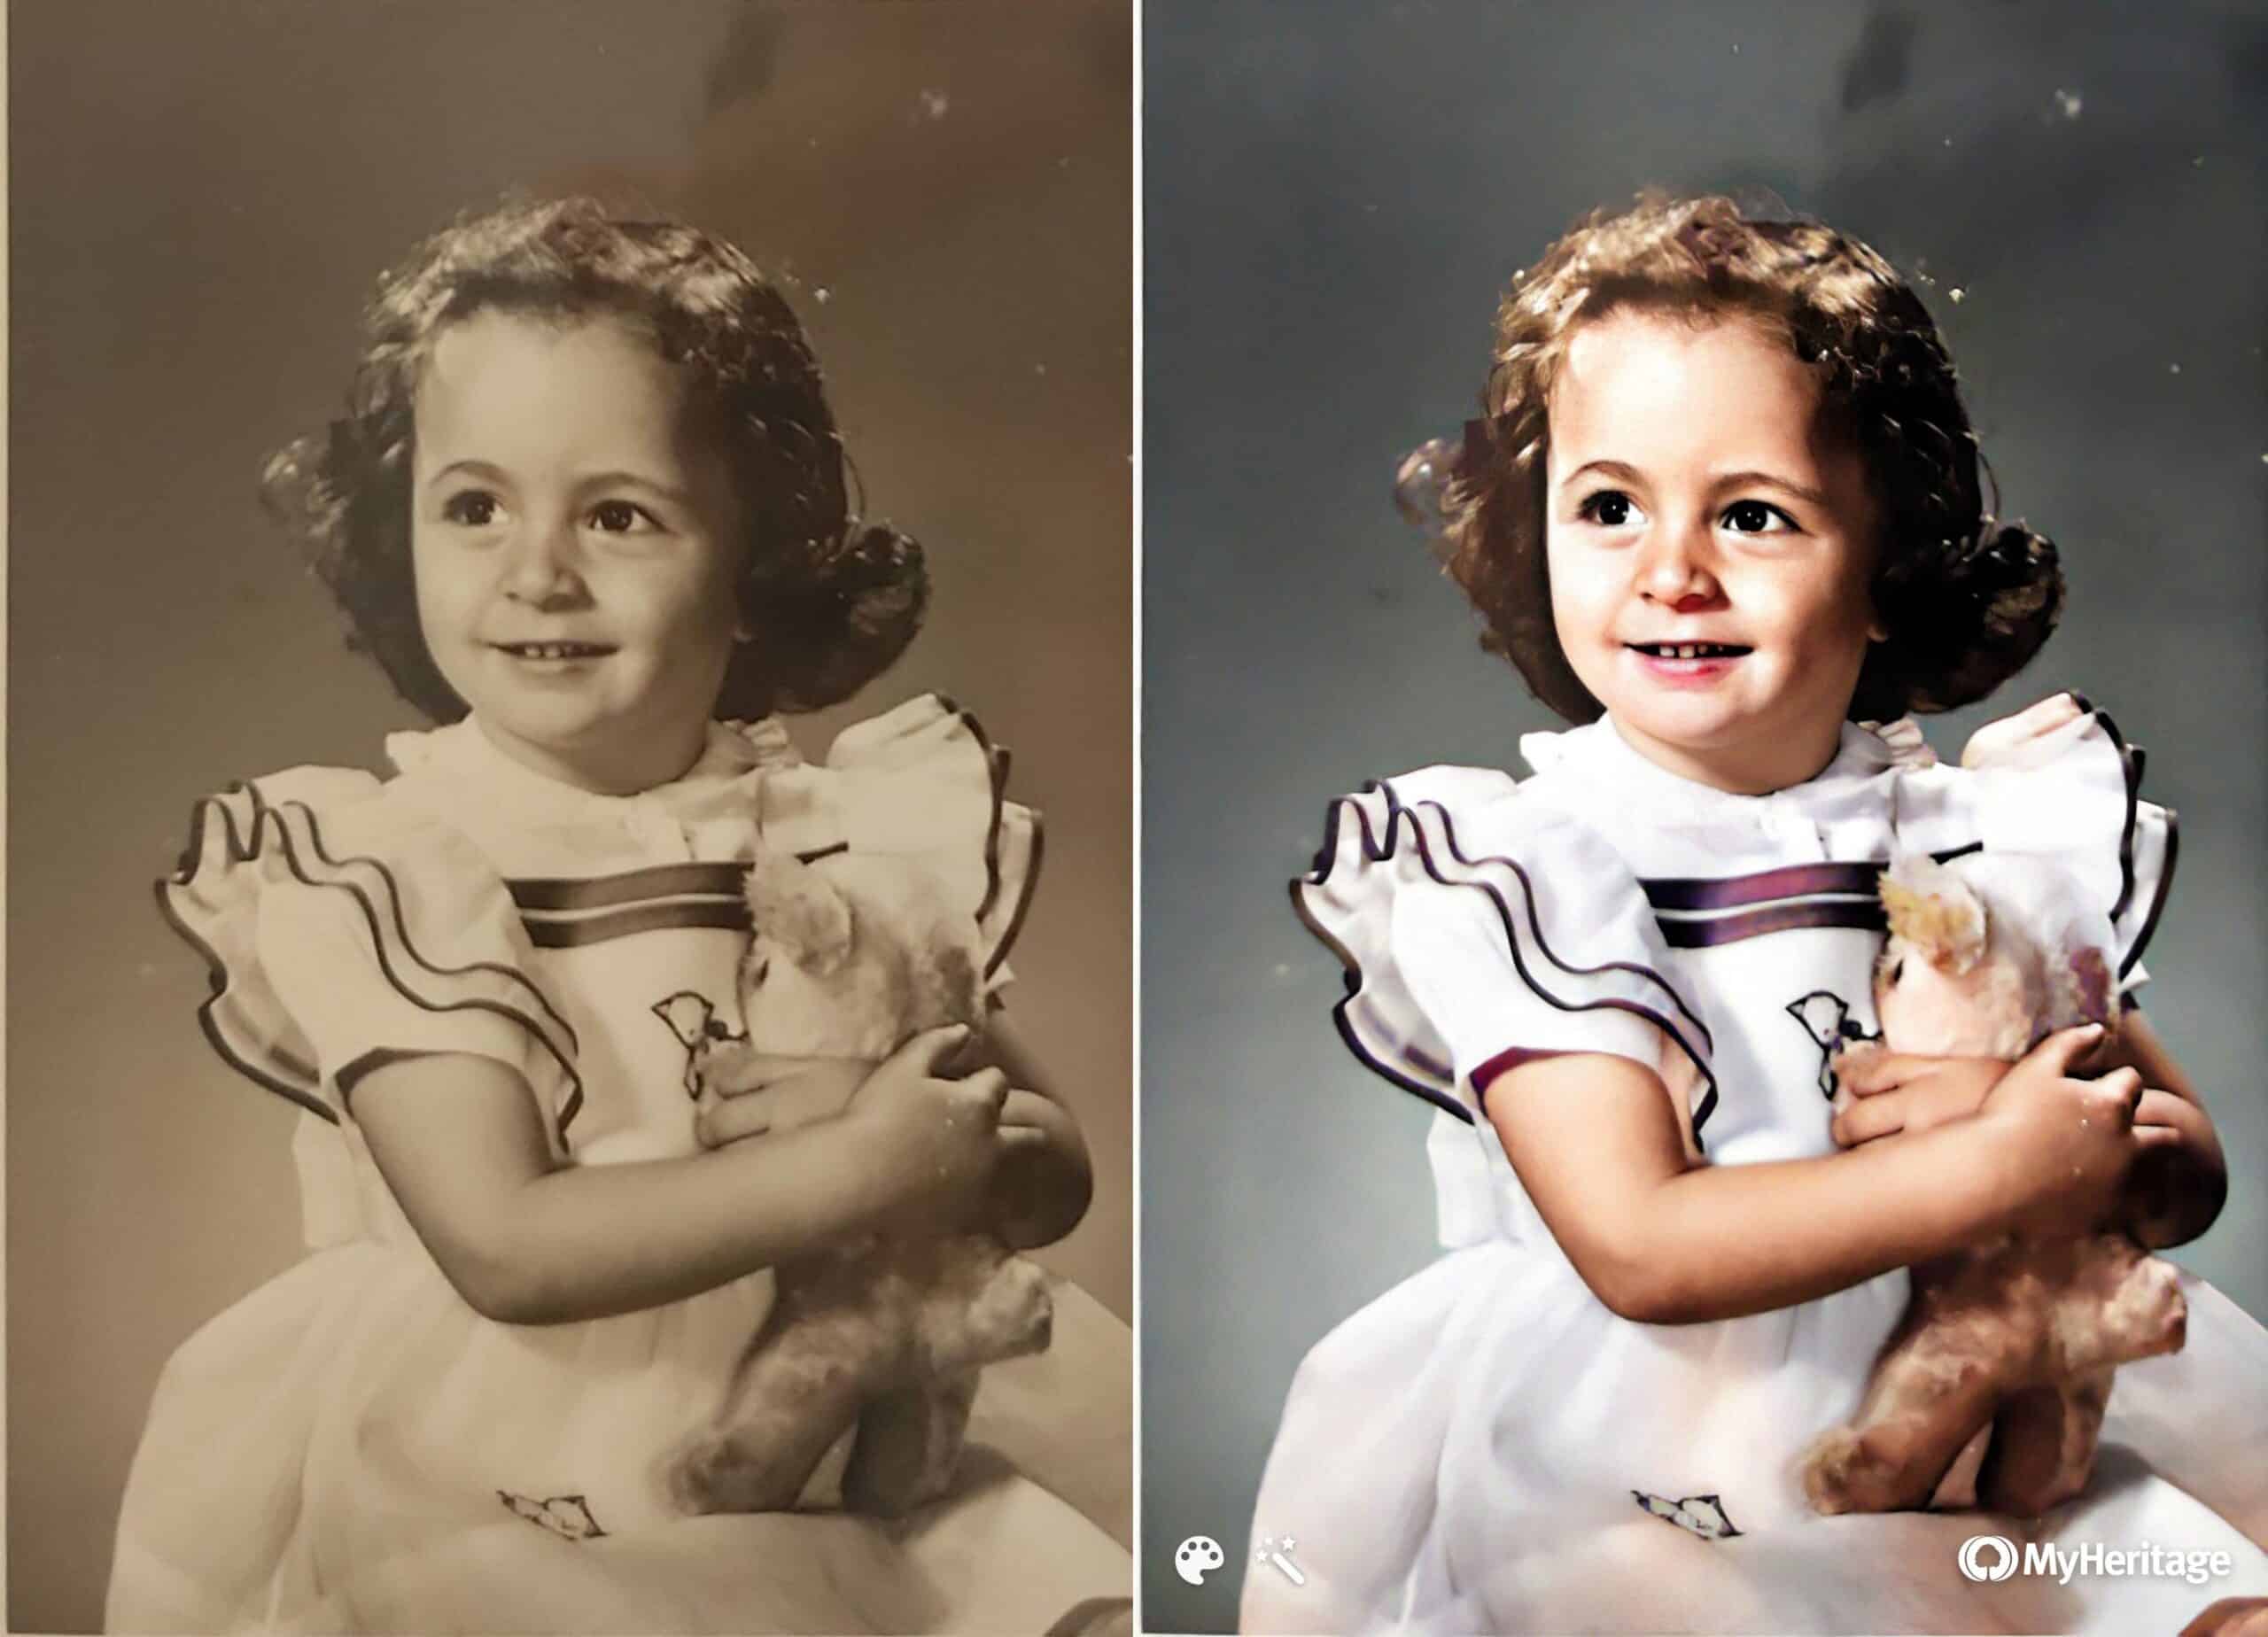 Before and after colorization and enhancement